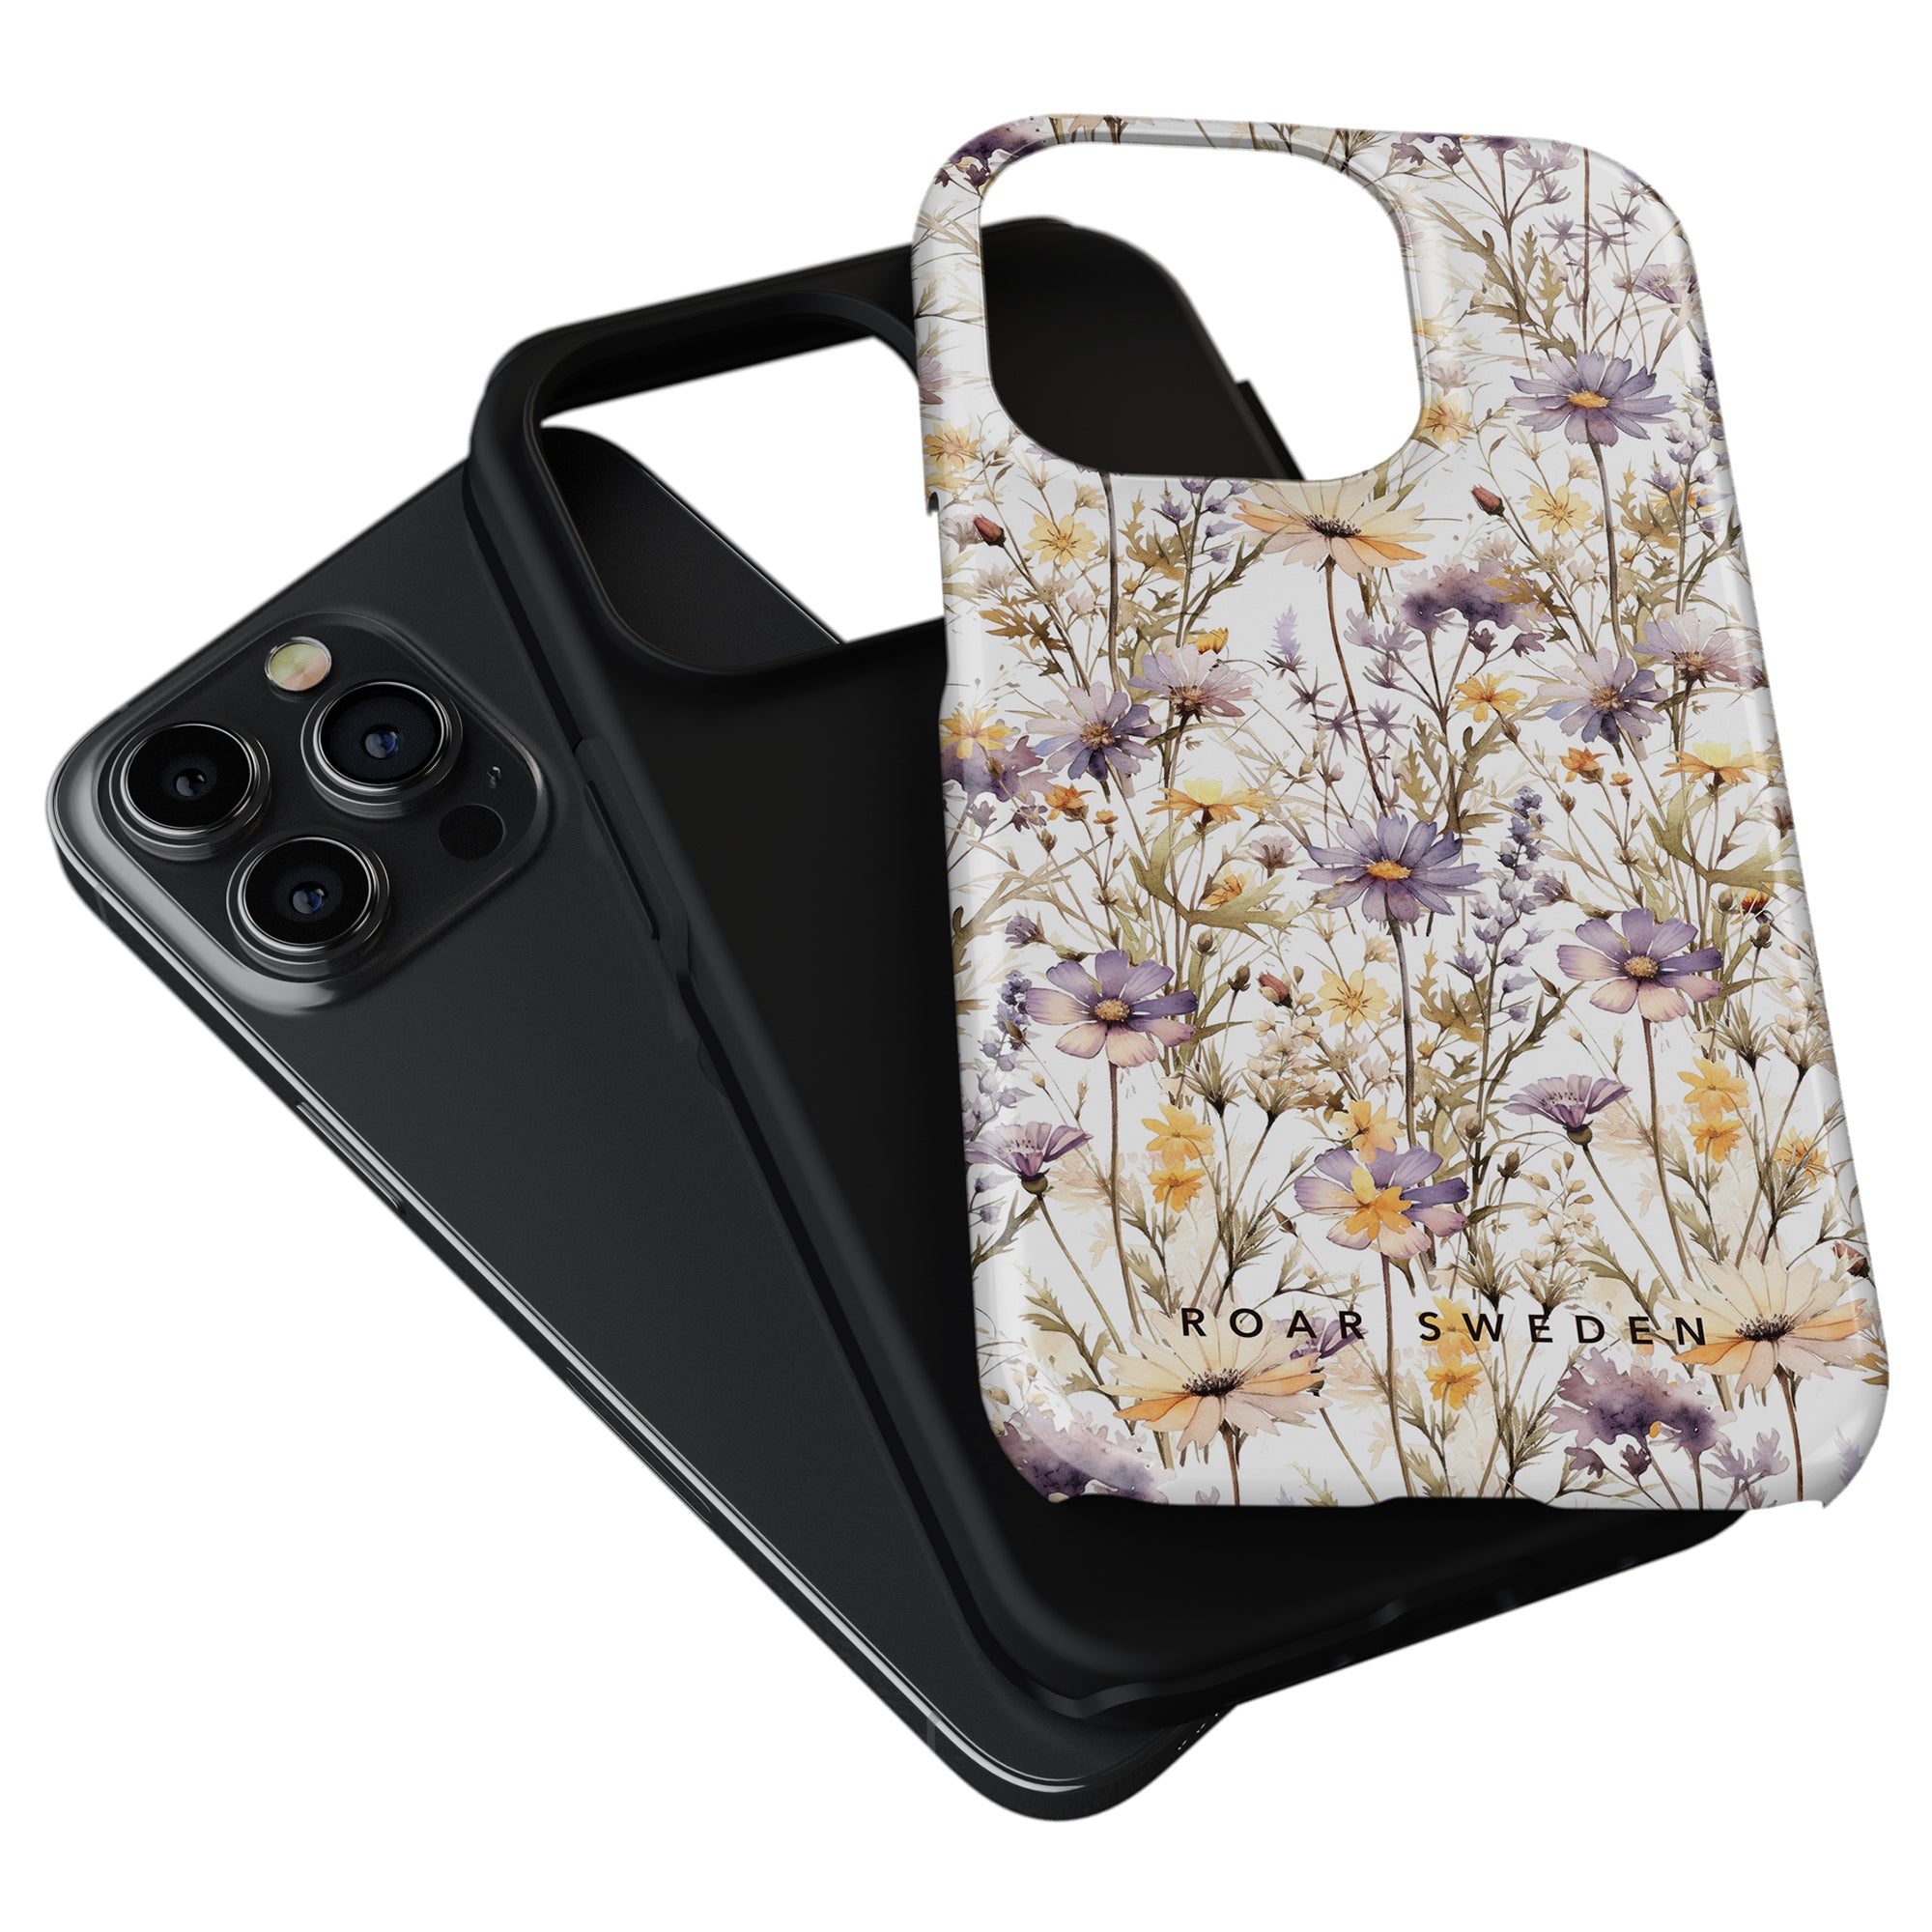 Two phone cases: one black and one with a floral design labeled "ROAR SWEDEN." The Purple Wildflower - Tough Case, adorned with Purple Wildflower patterns, offers both style and durability for your smartphone with triple rear cameras.